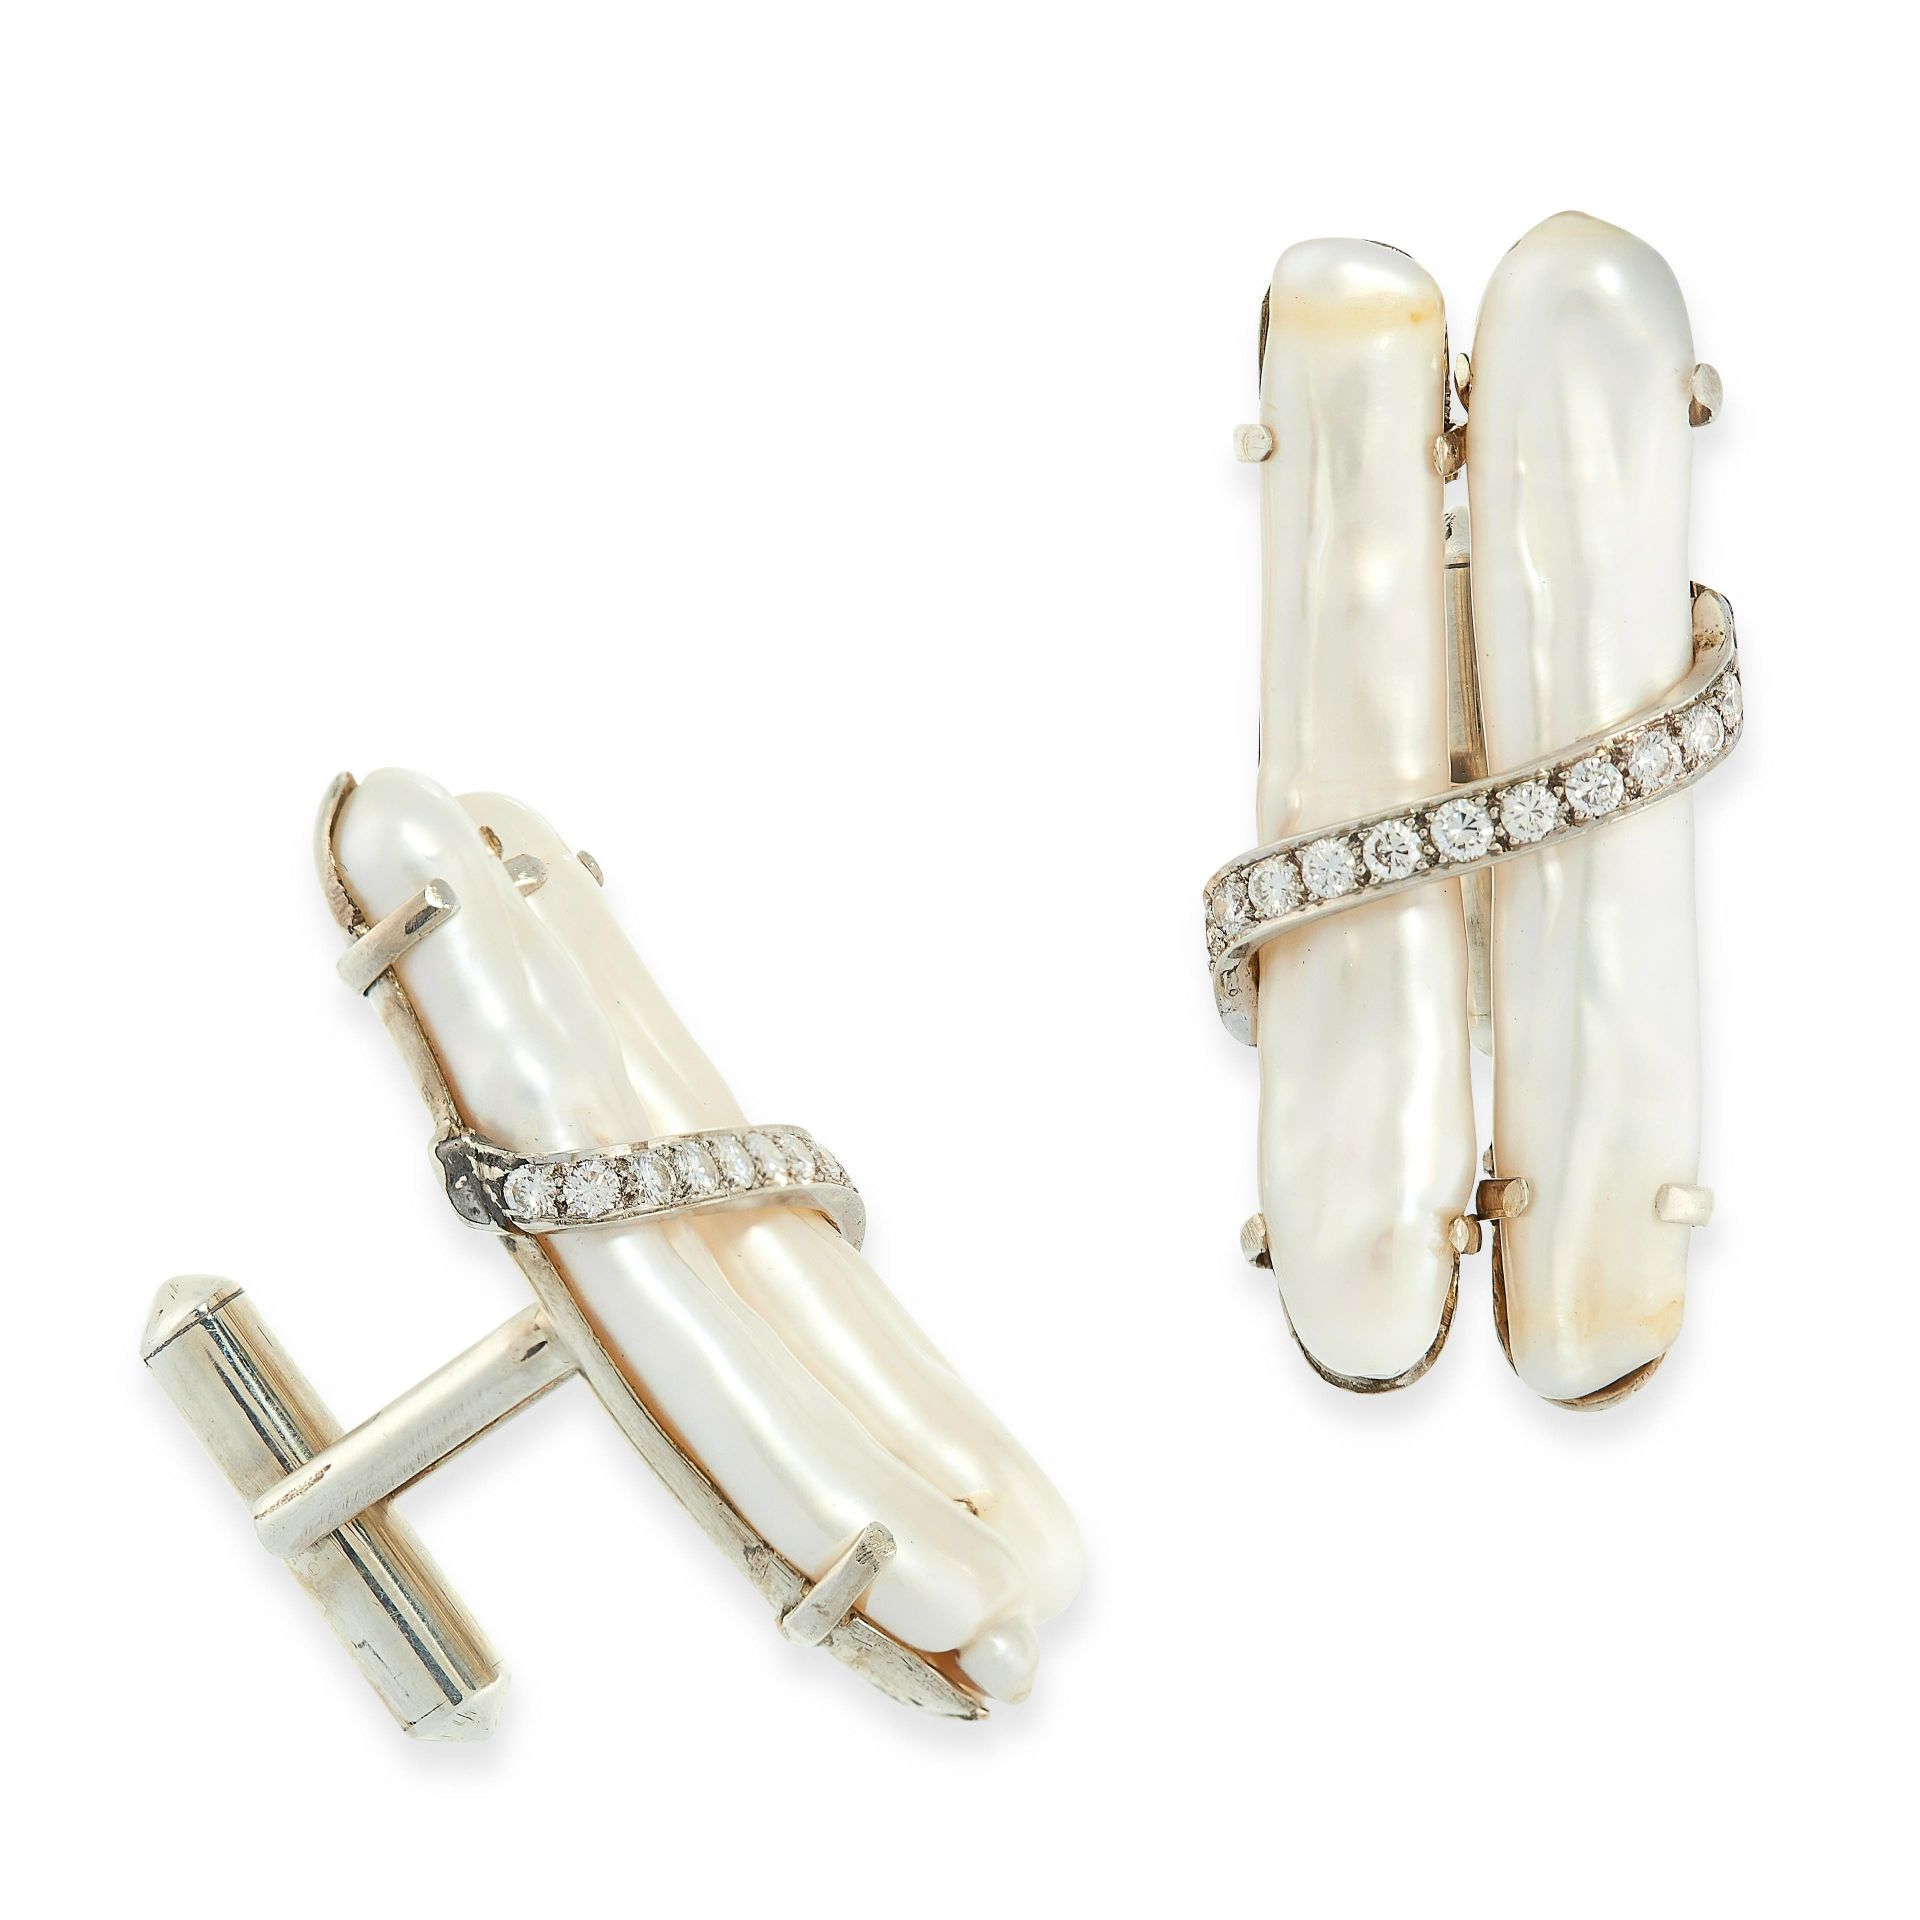 A PAIR OF PEARL AND DIAMOND CUFFLINKS each set with two elongated Mississippi river pearls, accented